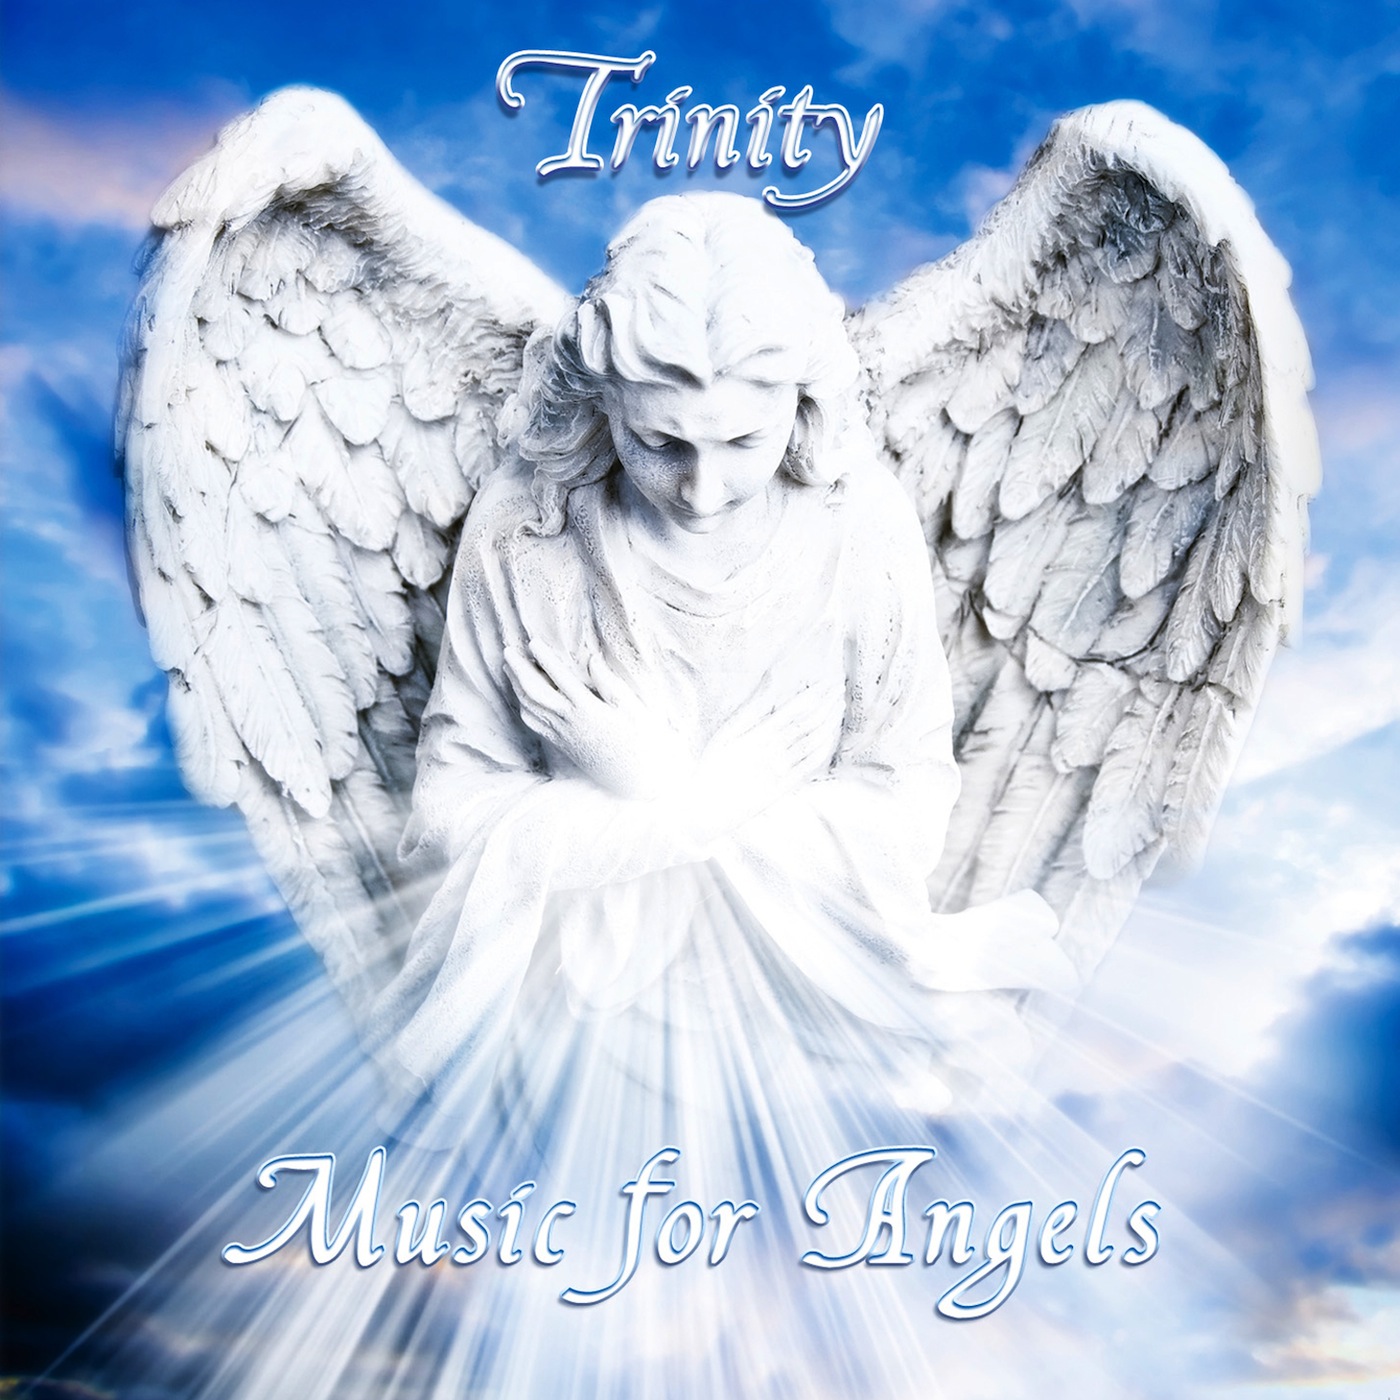 MUSIC - Trinity - Music for Angels CD cover